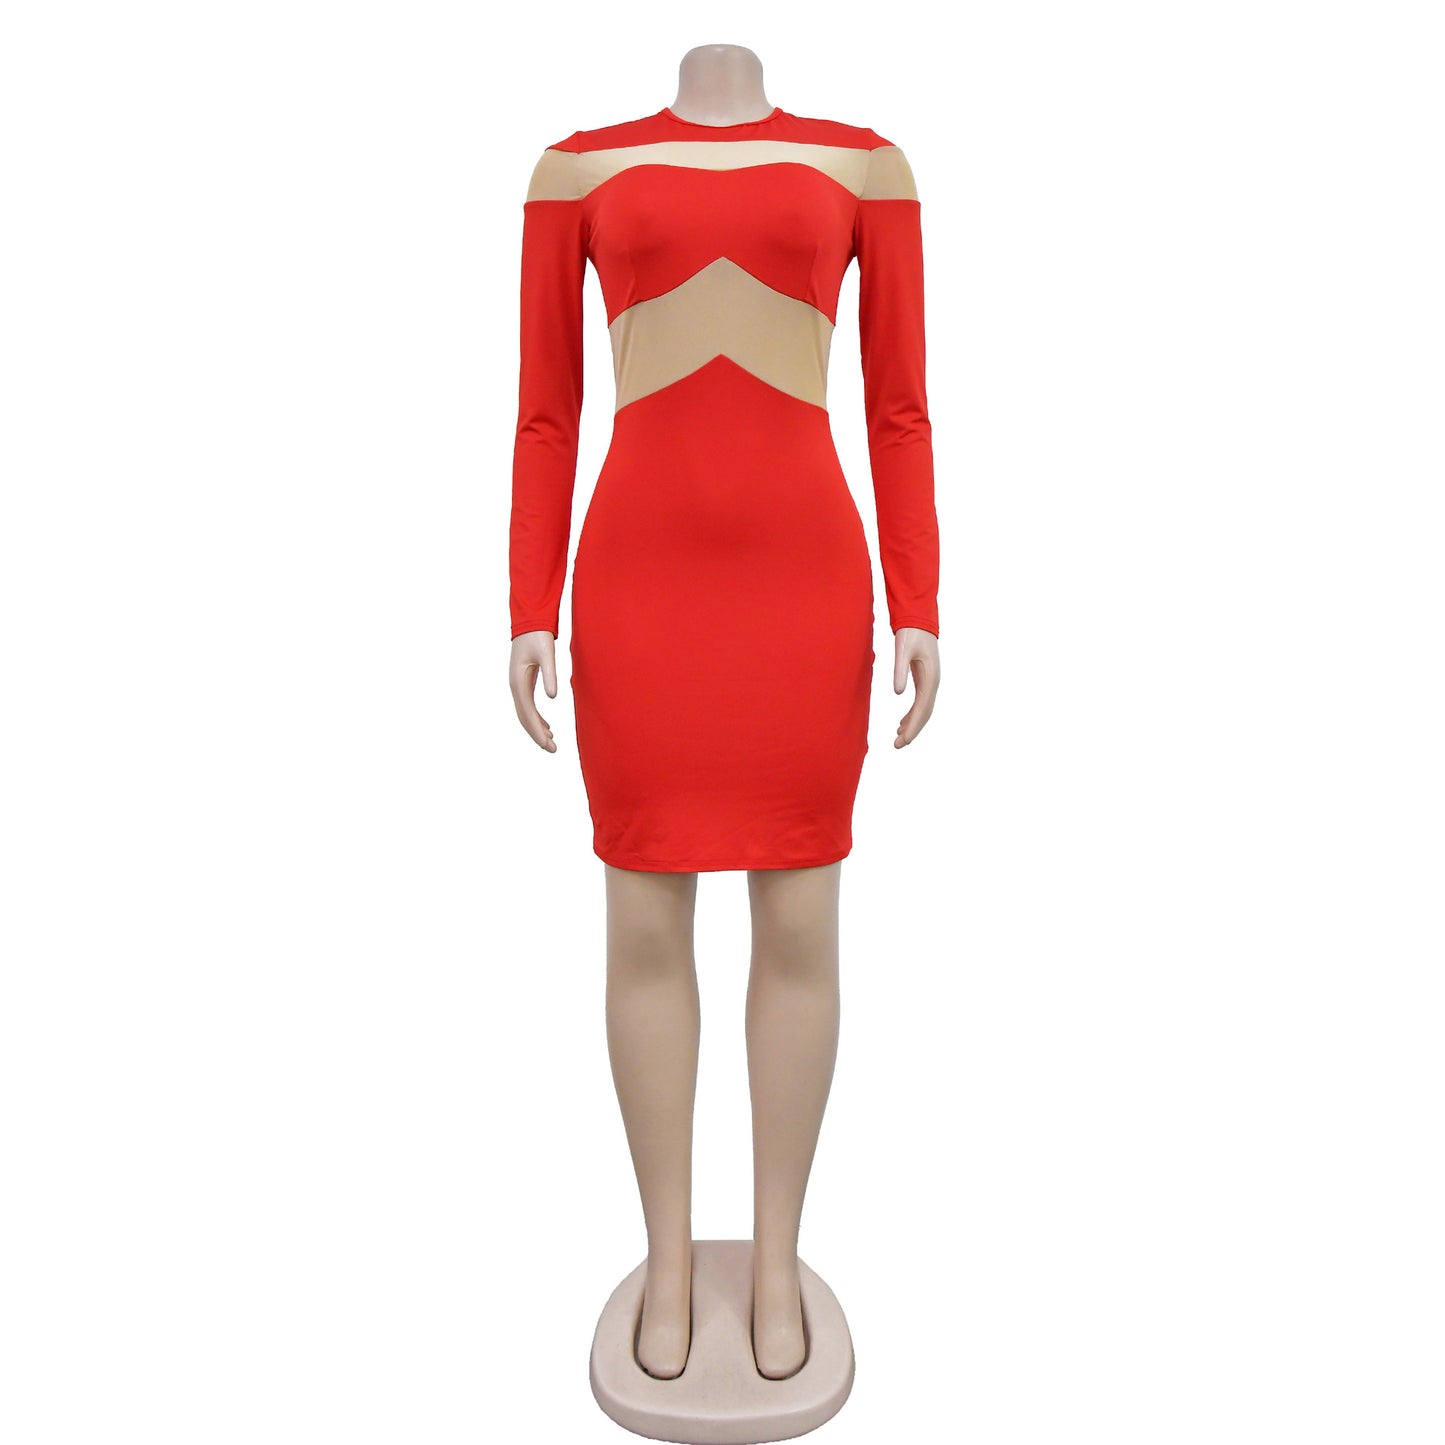 BamBam Fashion Women's Solid Color Long Sleeve Round Neck Cocktail Fancy Ladies Mesh Patchwork Bodycon Dress - BamBam Clothing